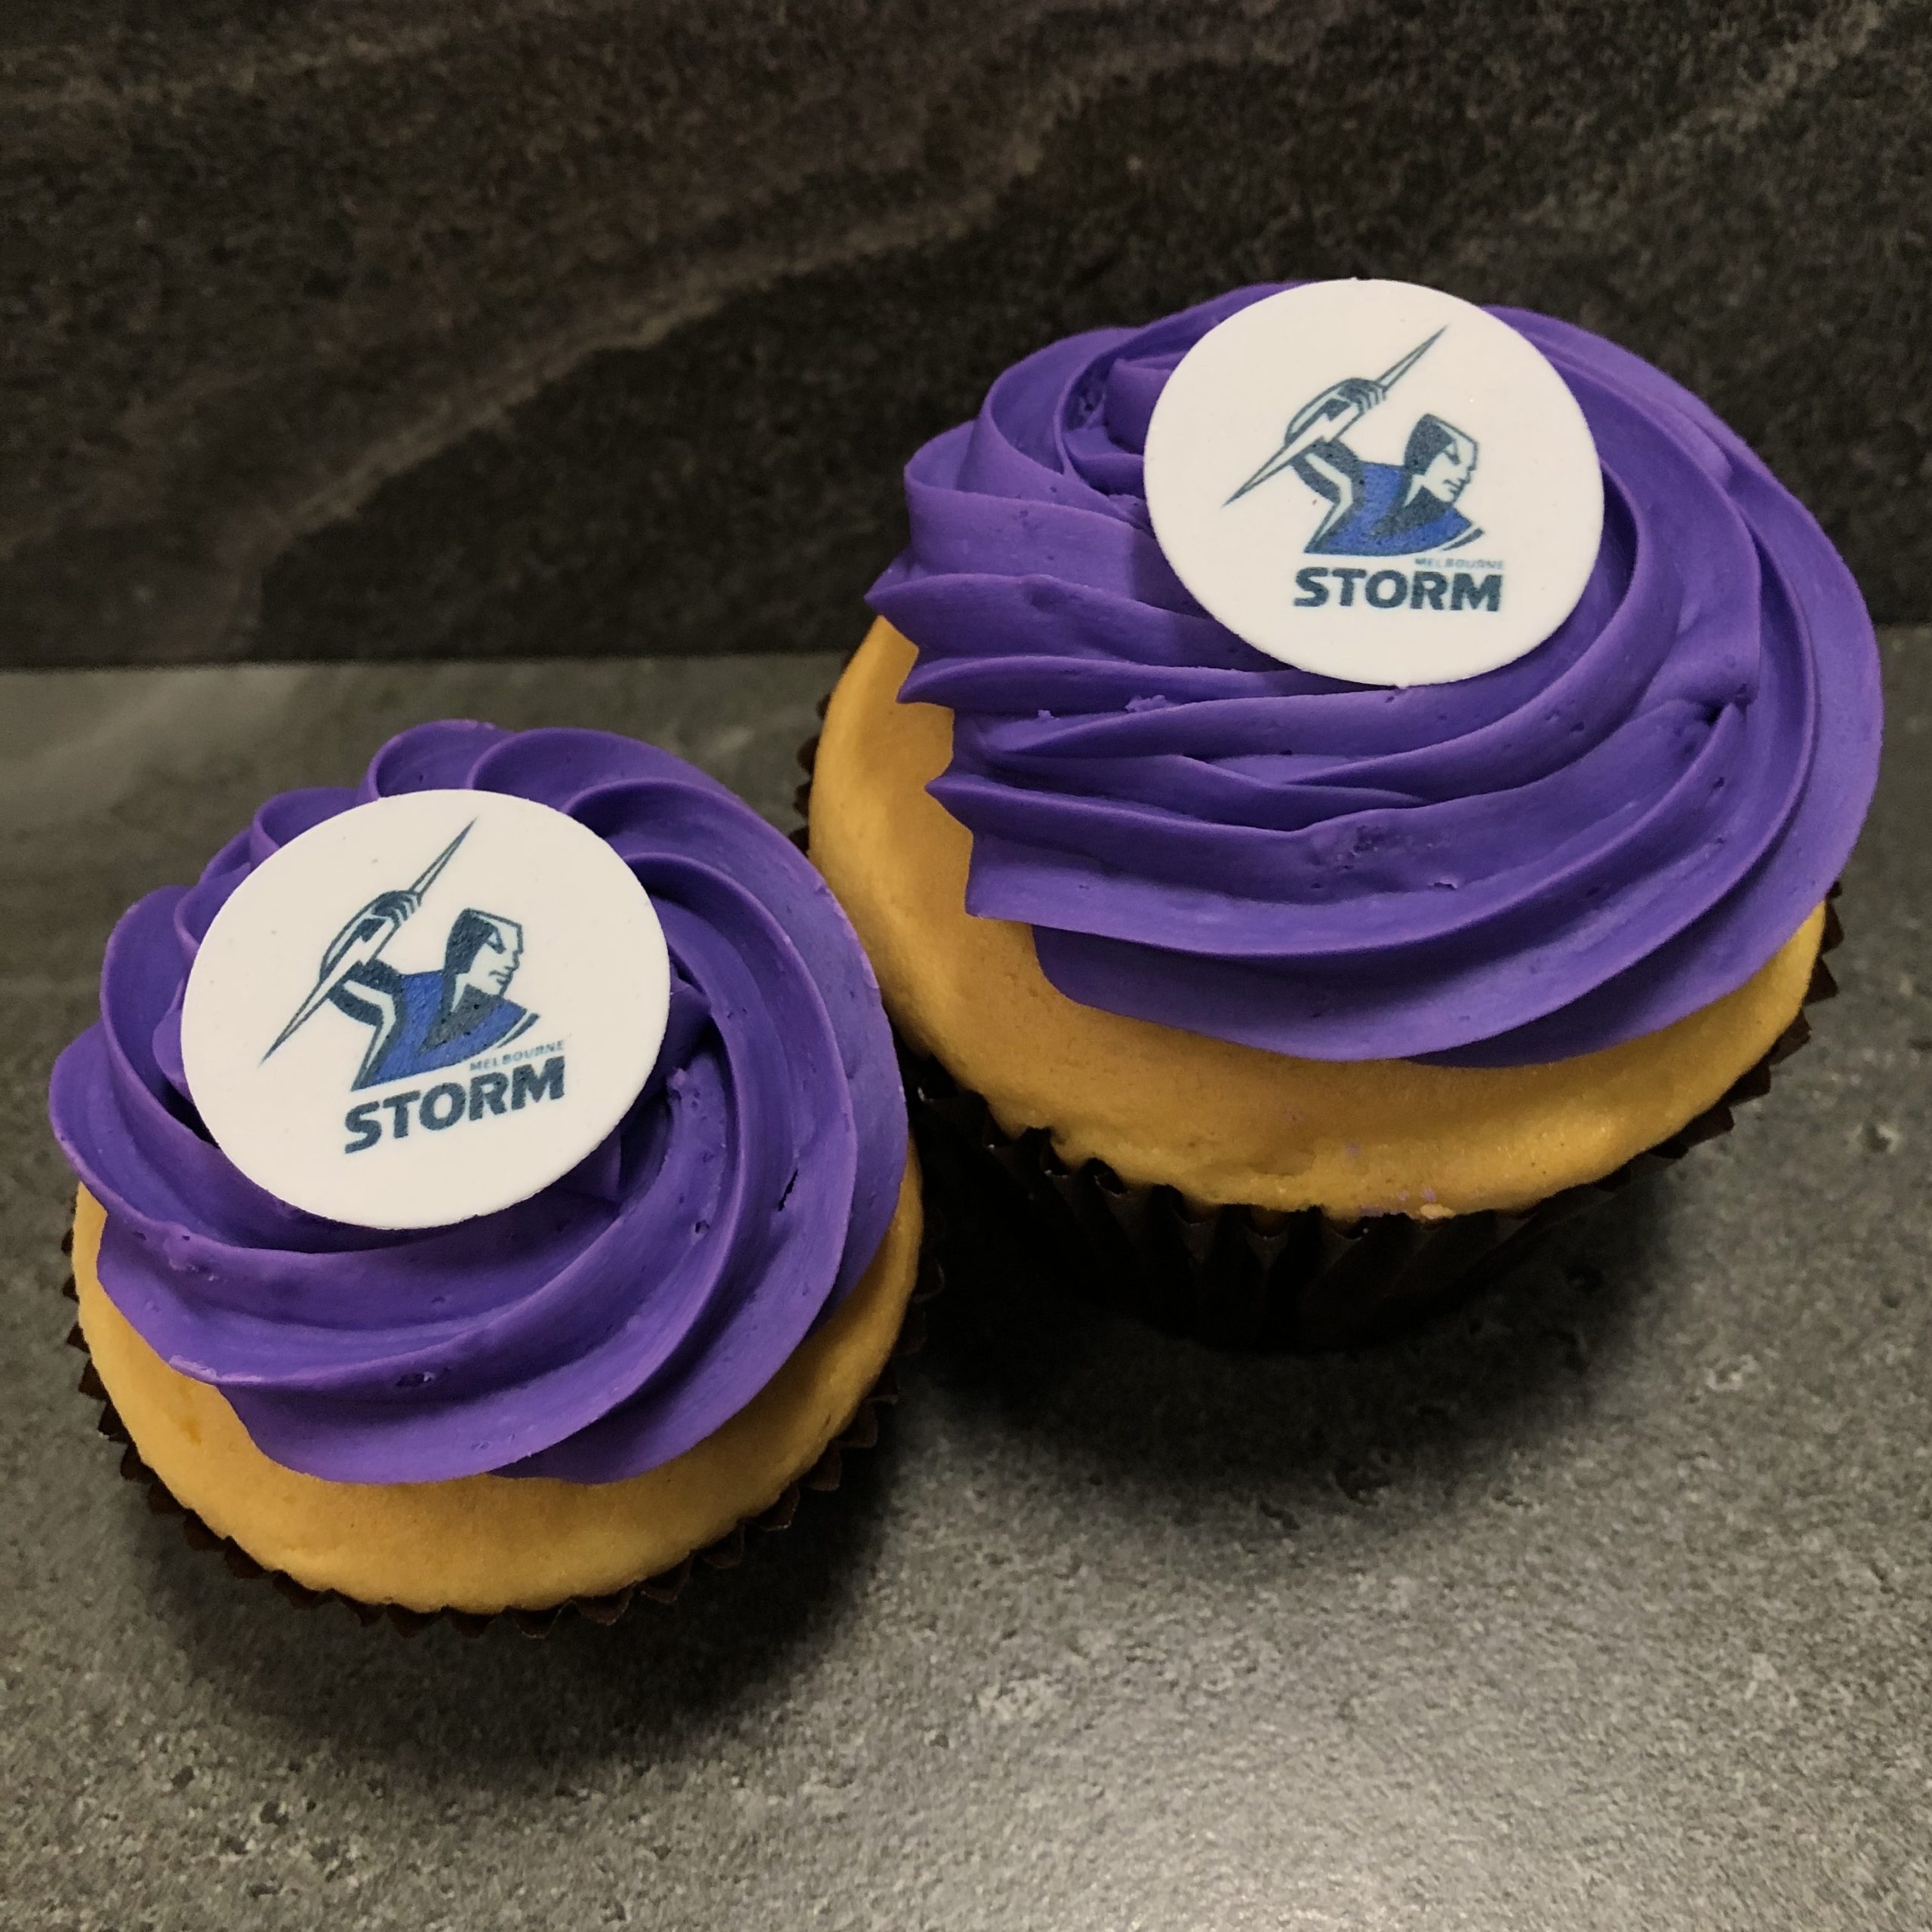 Melbourne Storm Cupcakes - Shop Online with Routleys Bakery